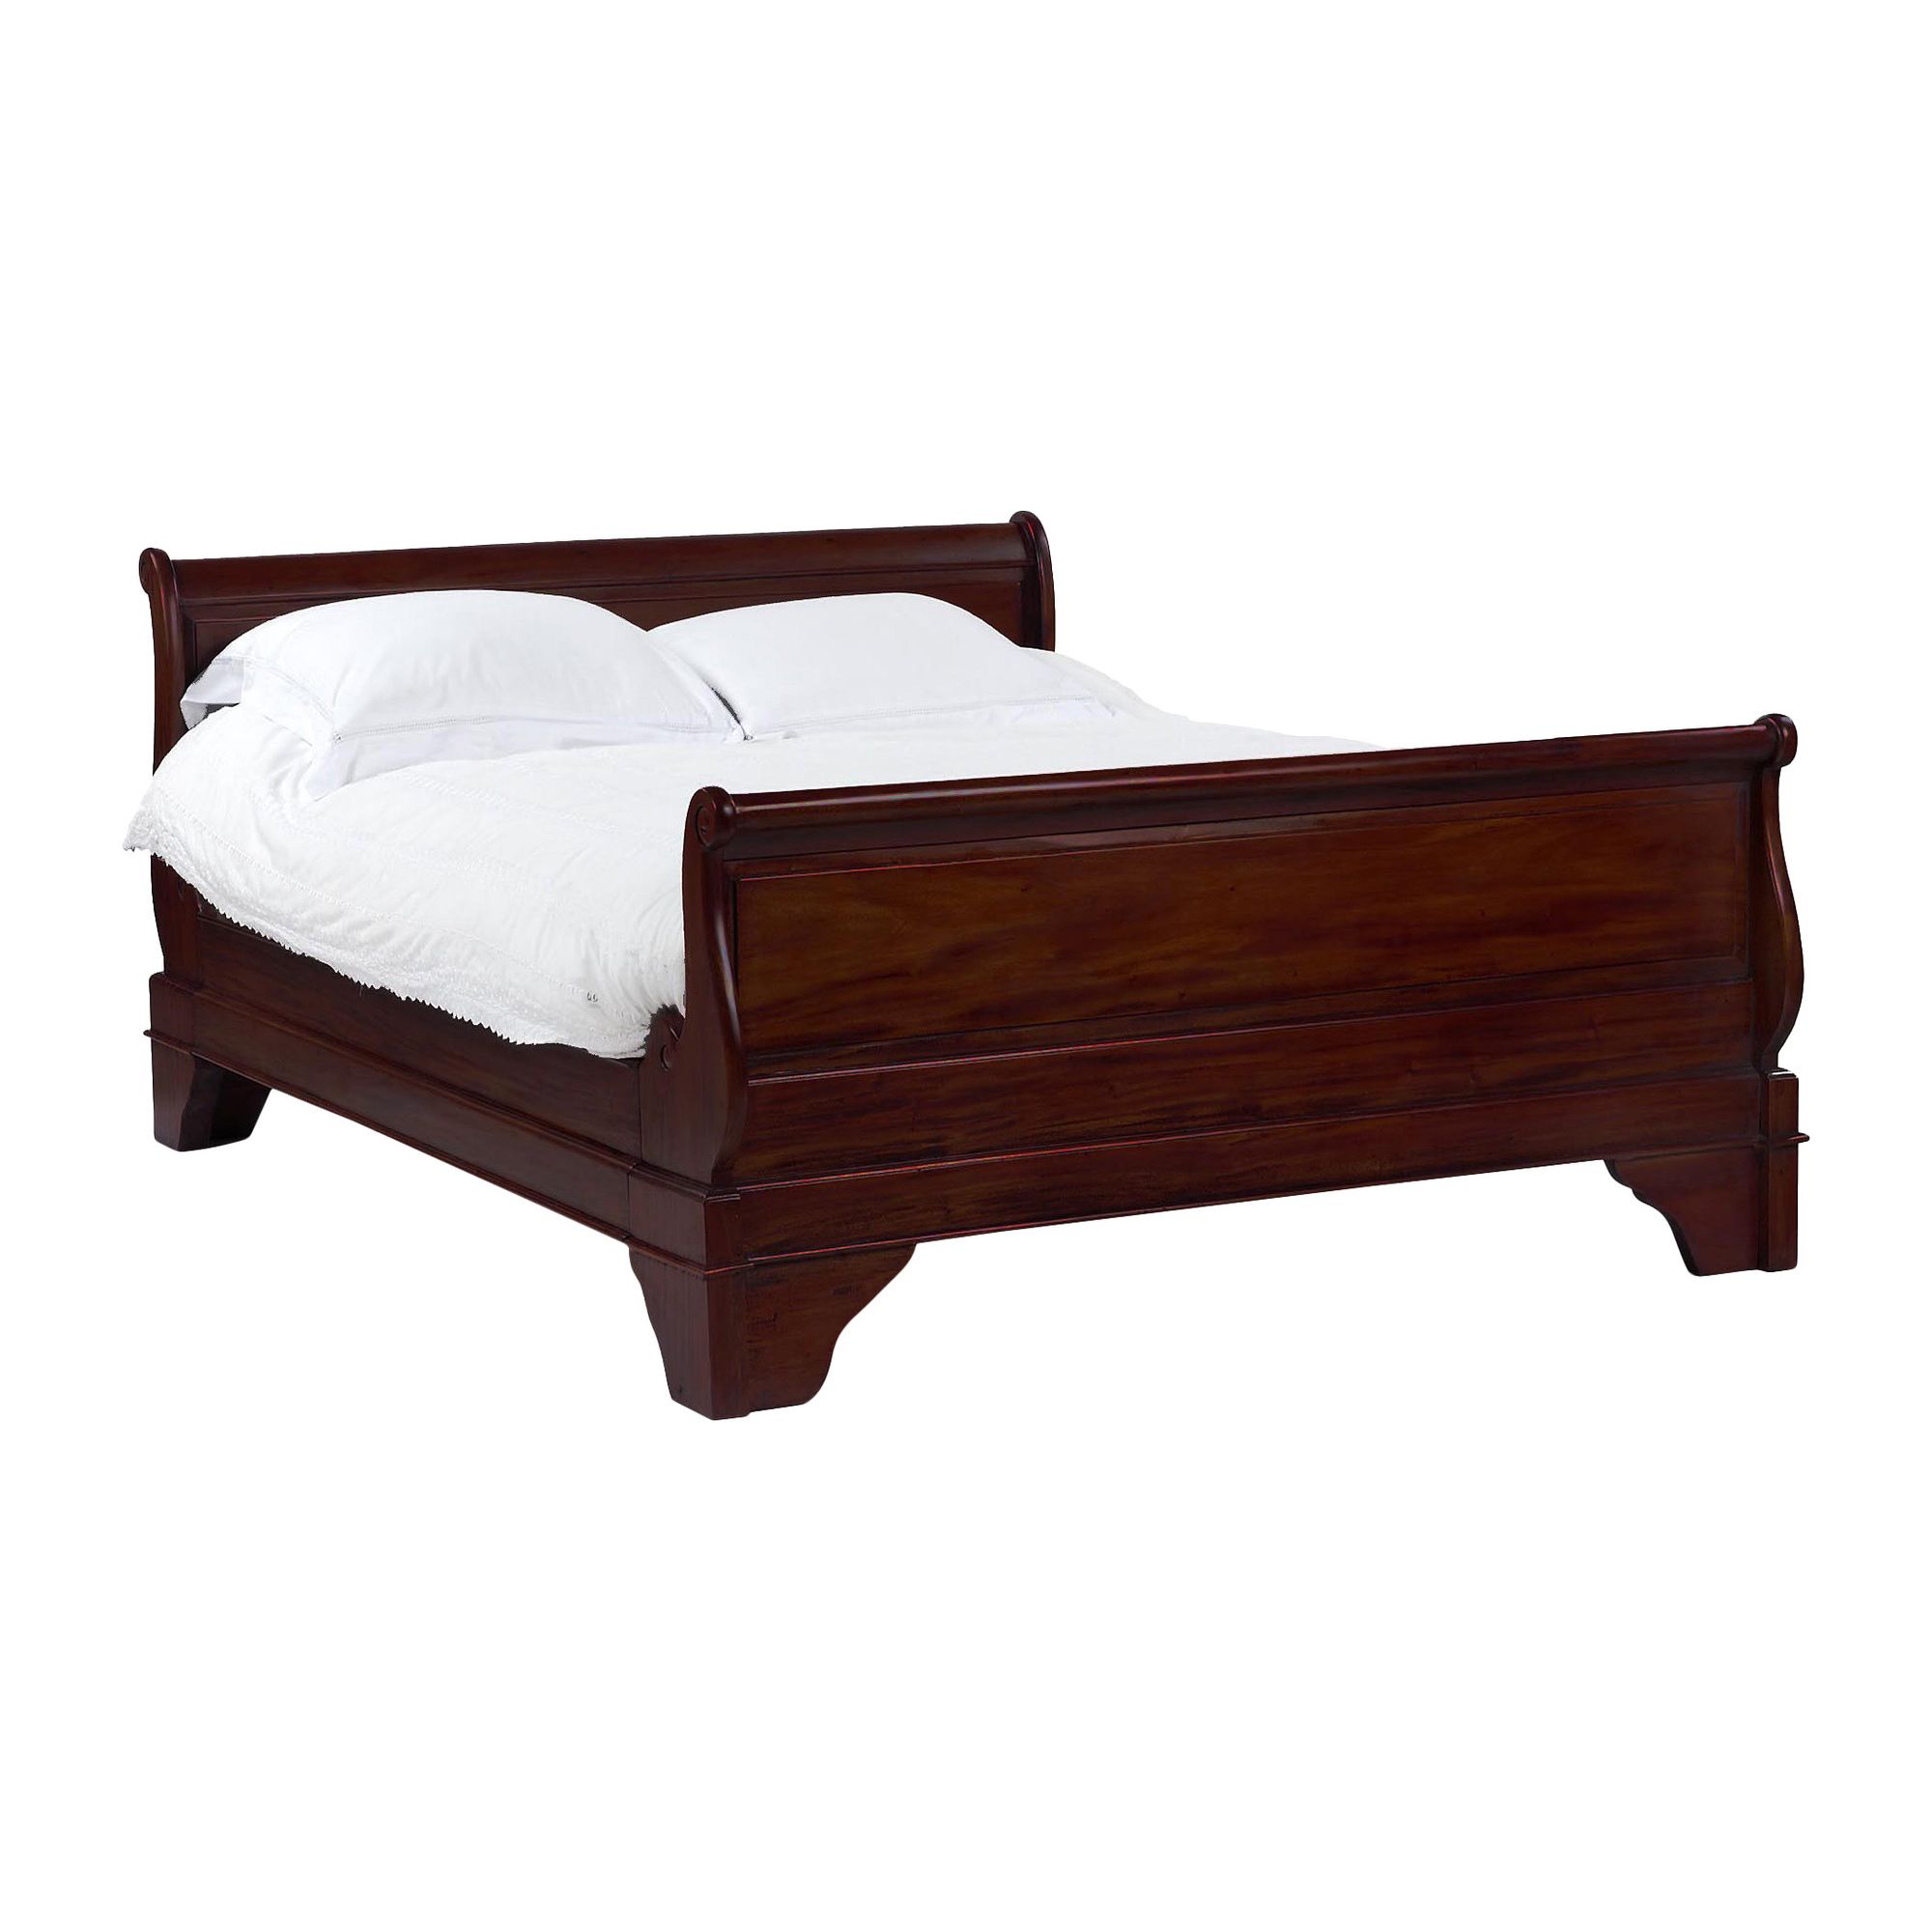 Anderson Bradshaw Colonial French Sleigh Bed Frame - Single at Tesco Direct